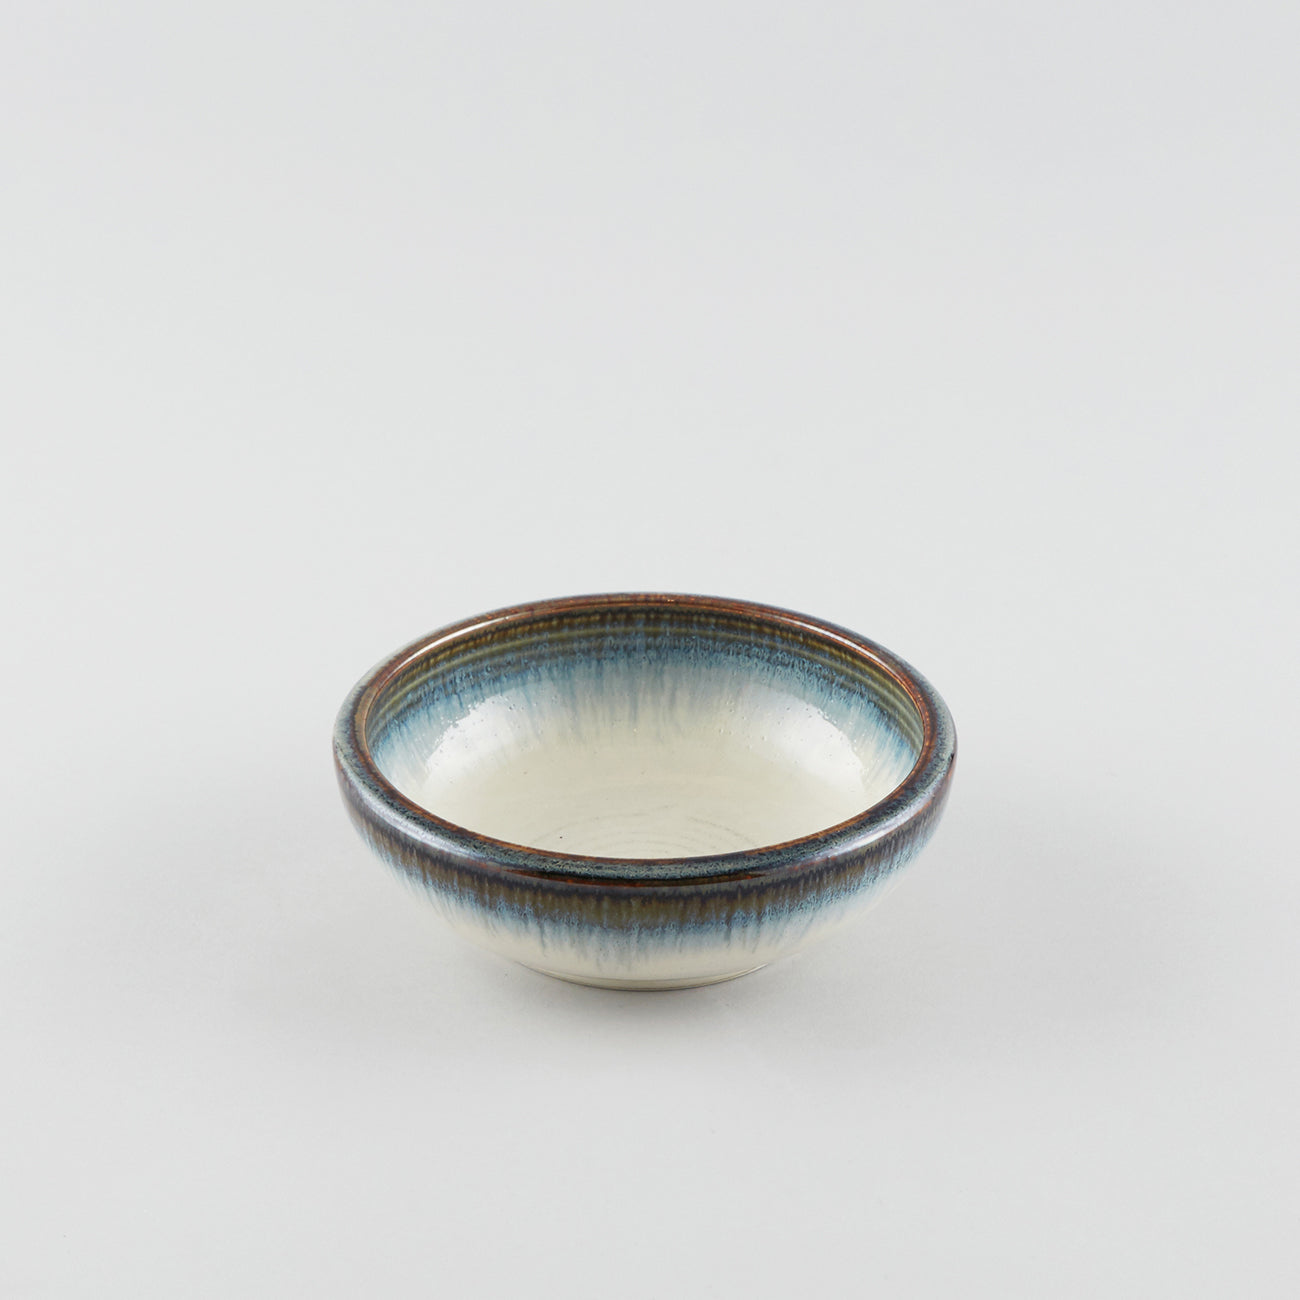 Earth White with Blue Tint Rim - Round Bowl